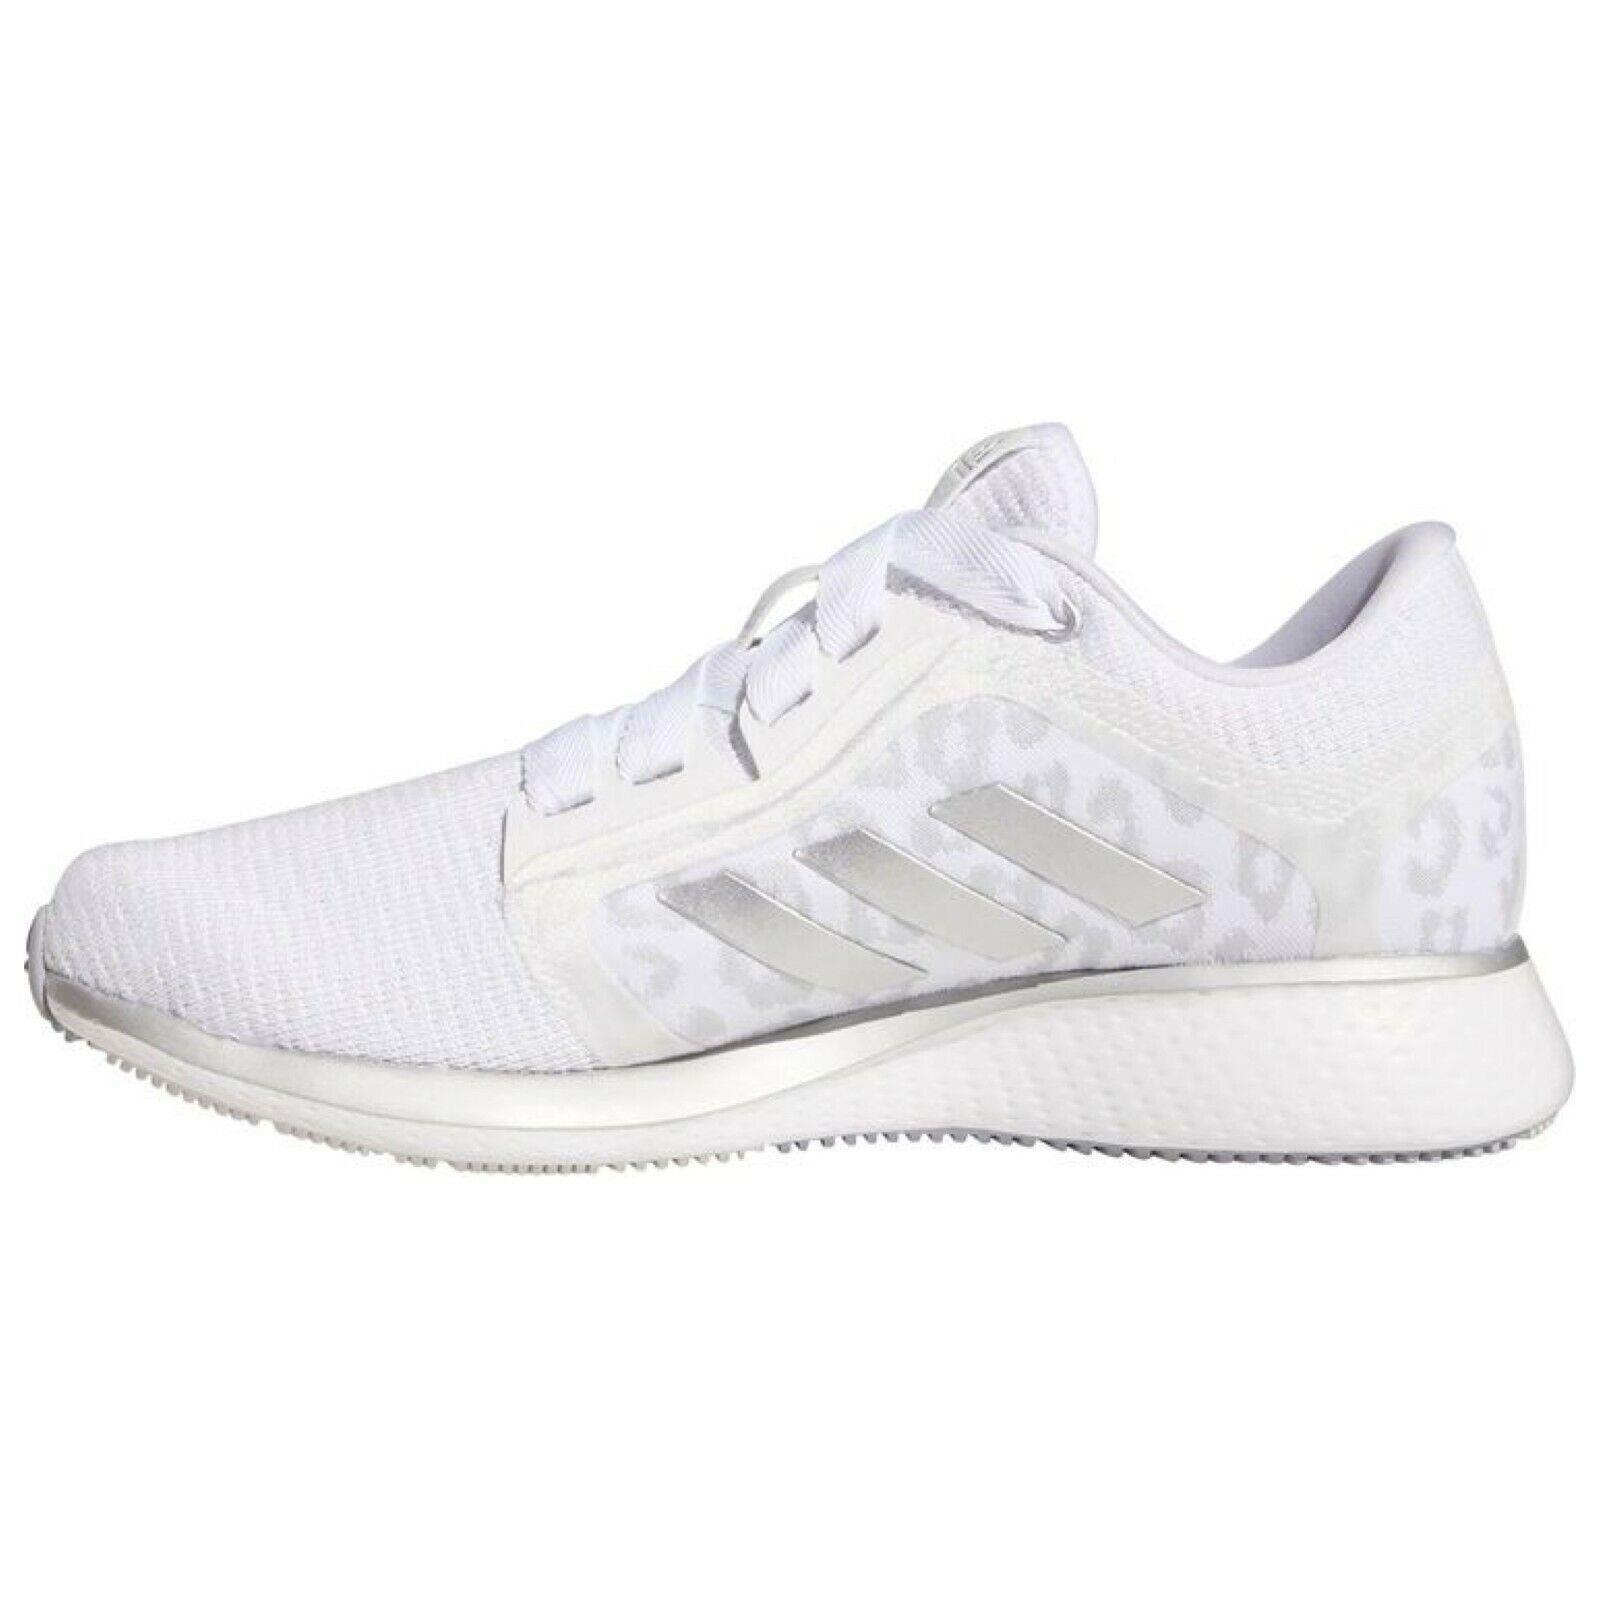 Adidas shoes Edge Lux - White , GREY/WHITE/LEOPARD Manufacturer 1